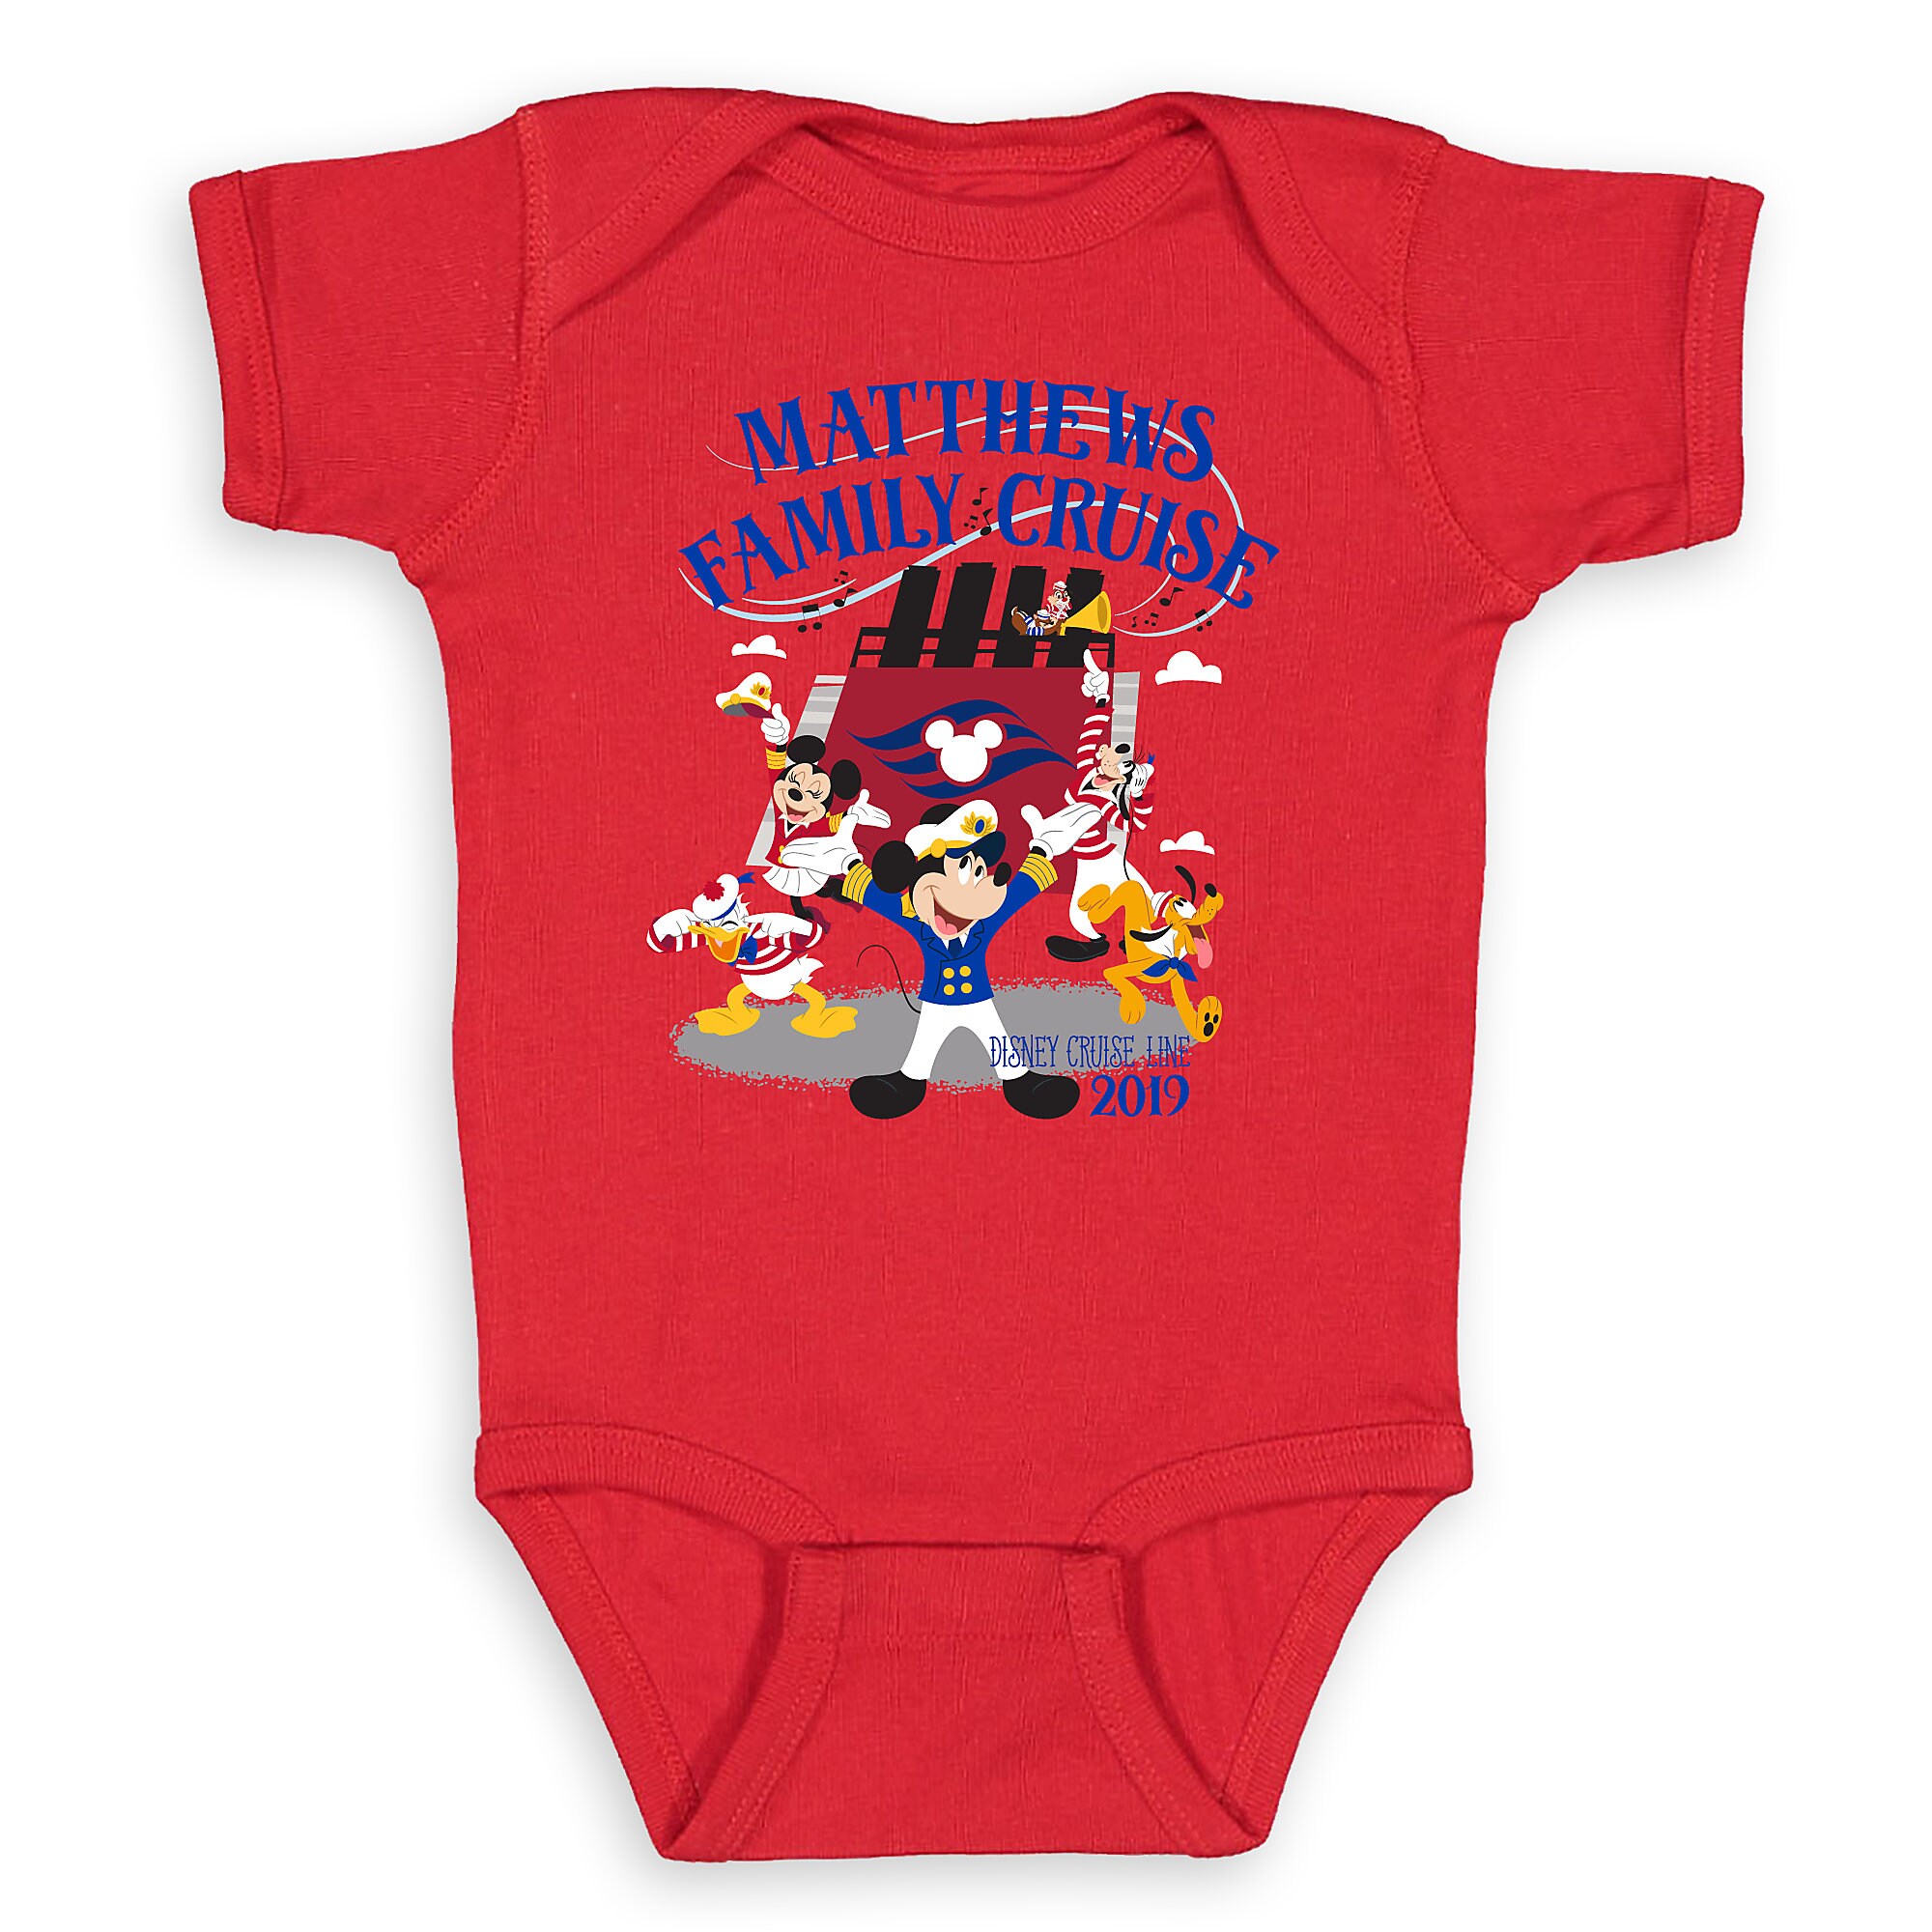 Infants' Captain Mickey Mouse and Crew Disney Cruise Line Family Cruise 2019 Bodysuit - Customized